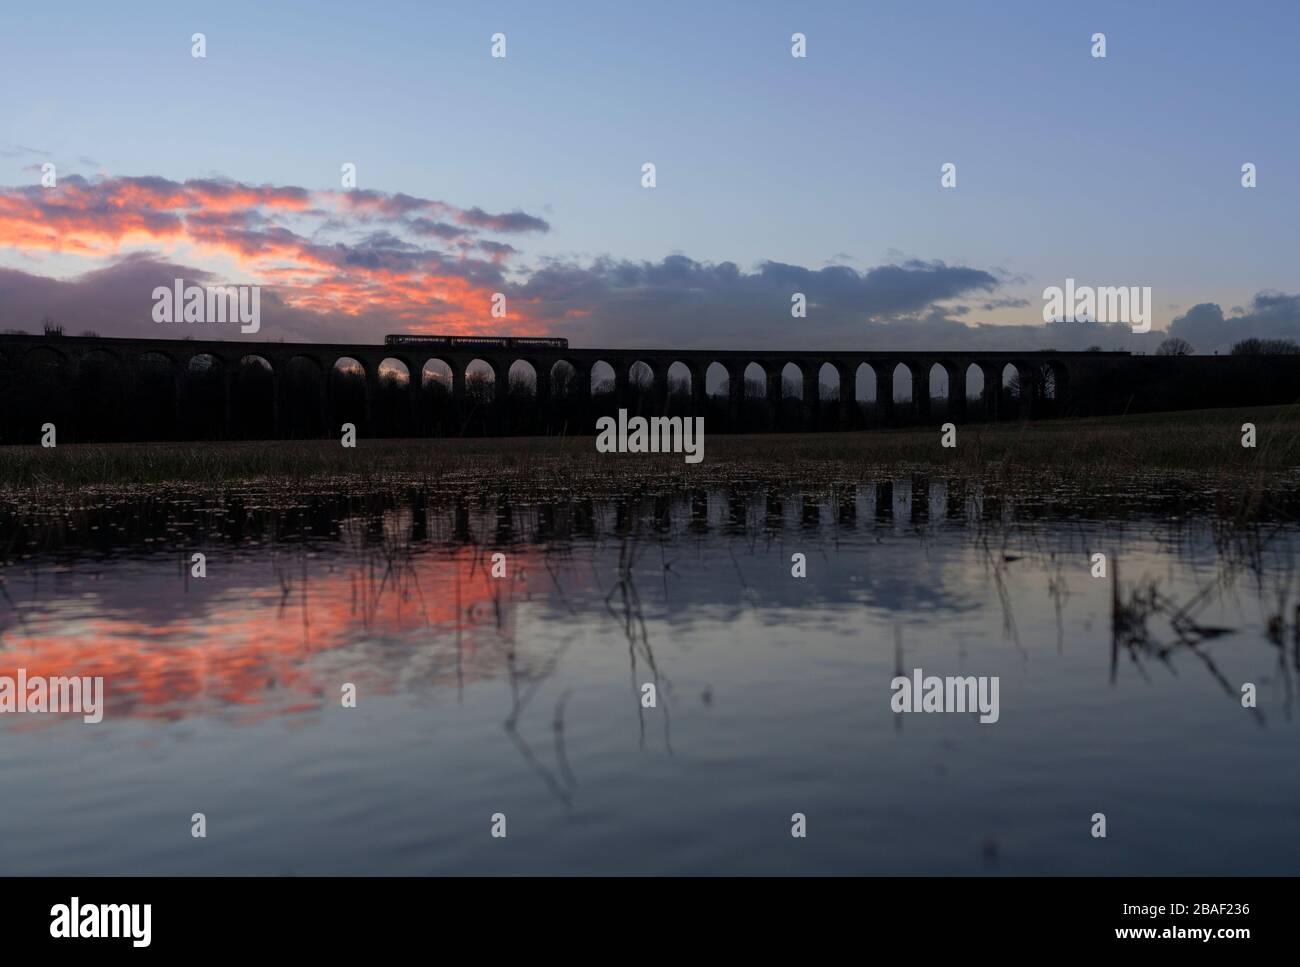 Northern Trains class 144 pacer train crossing the arched Penistone viaduct making a sunset silhouette reflected in a flooded field Stock Photo